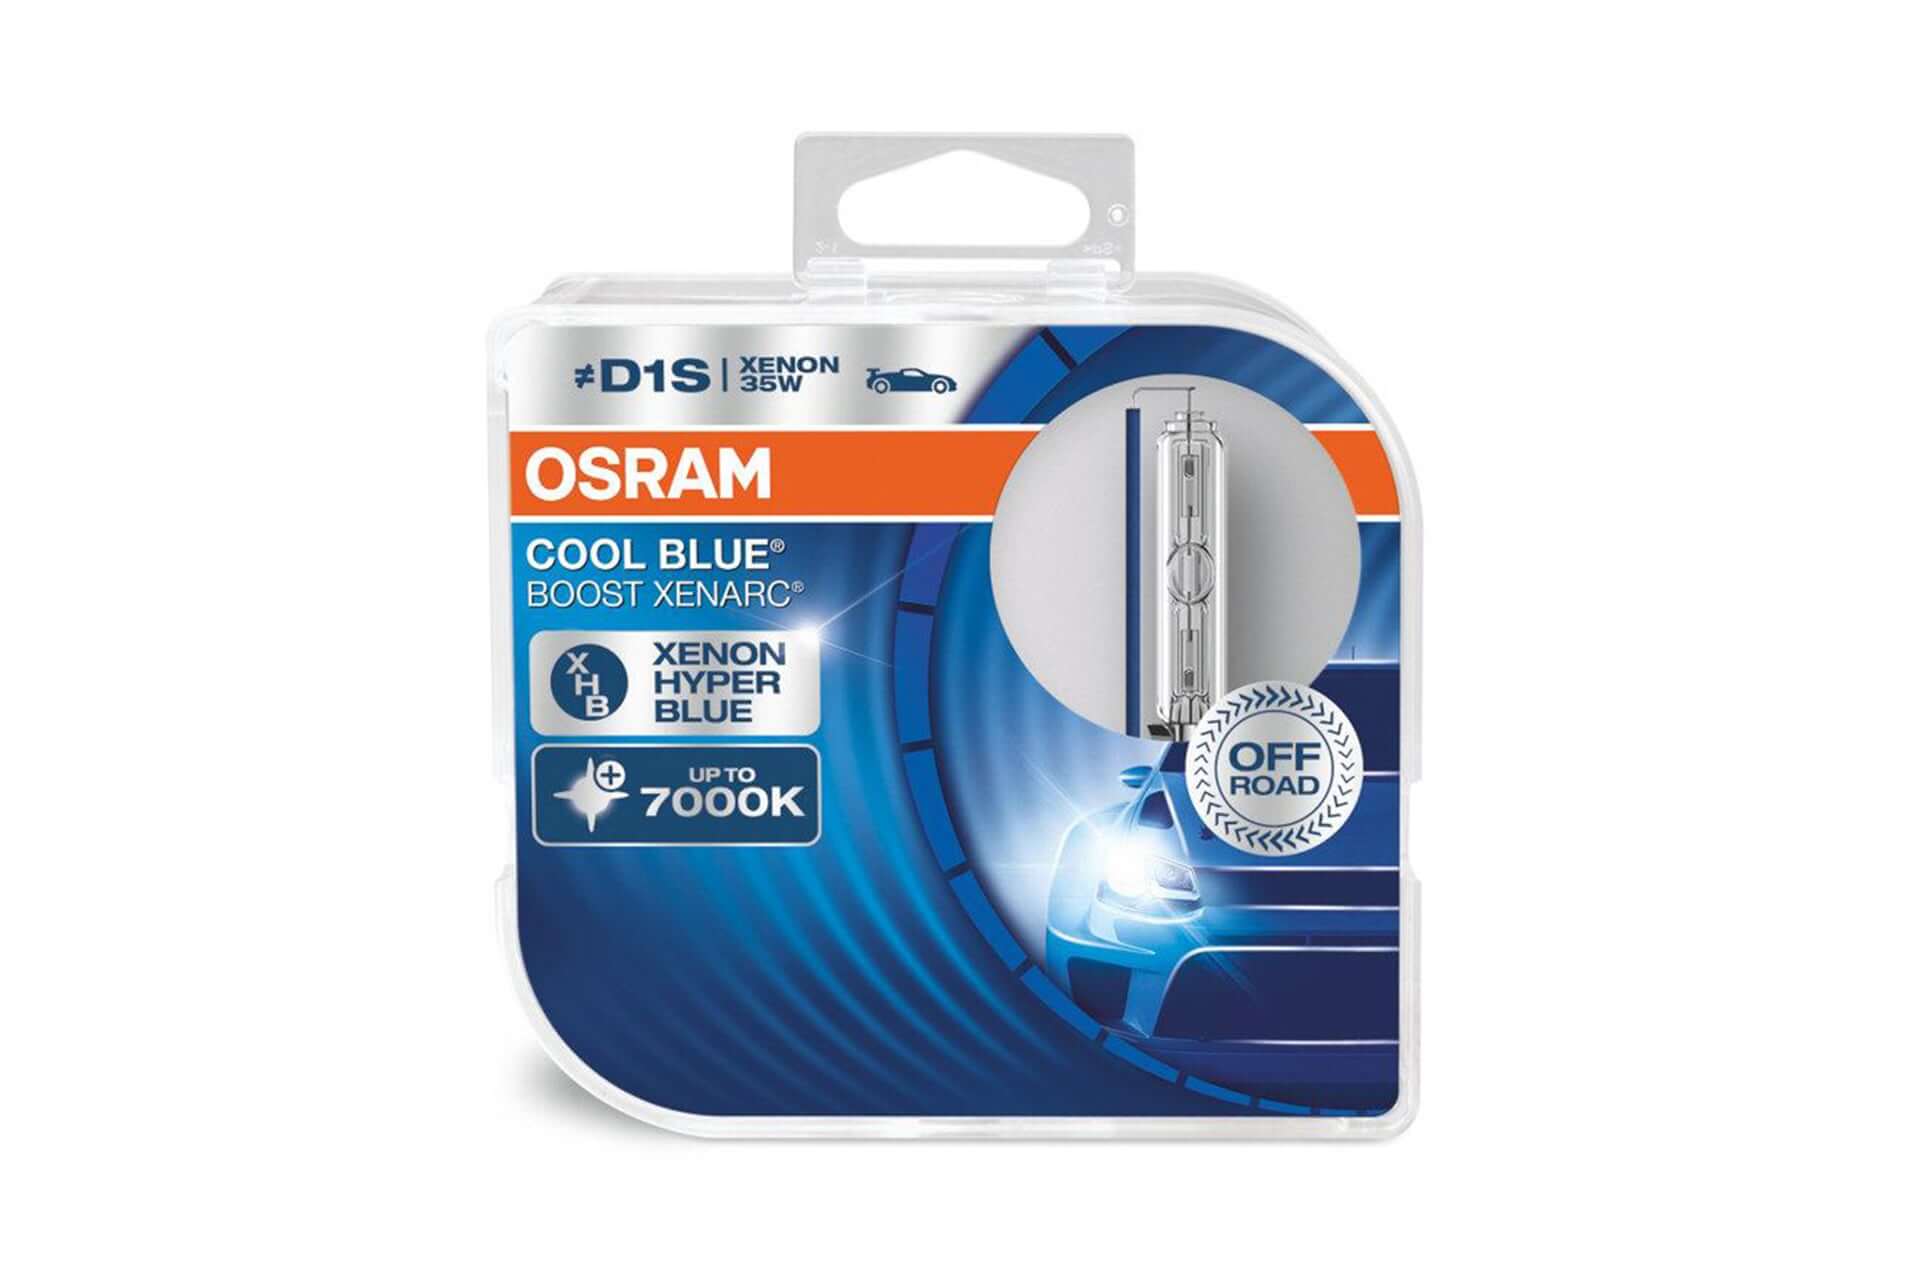 Osram / Philips / LED headlights / excluded from campaigns